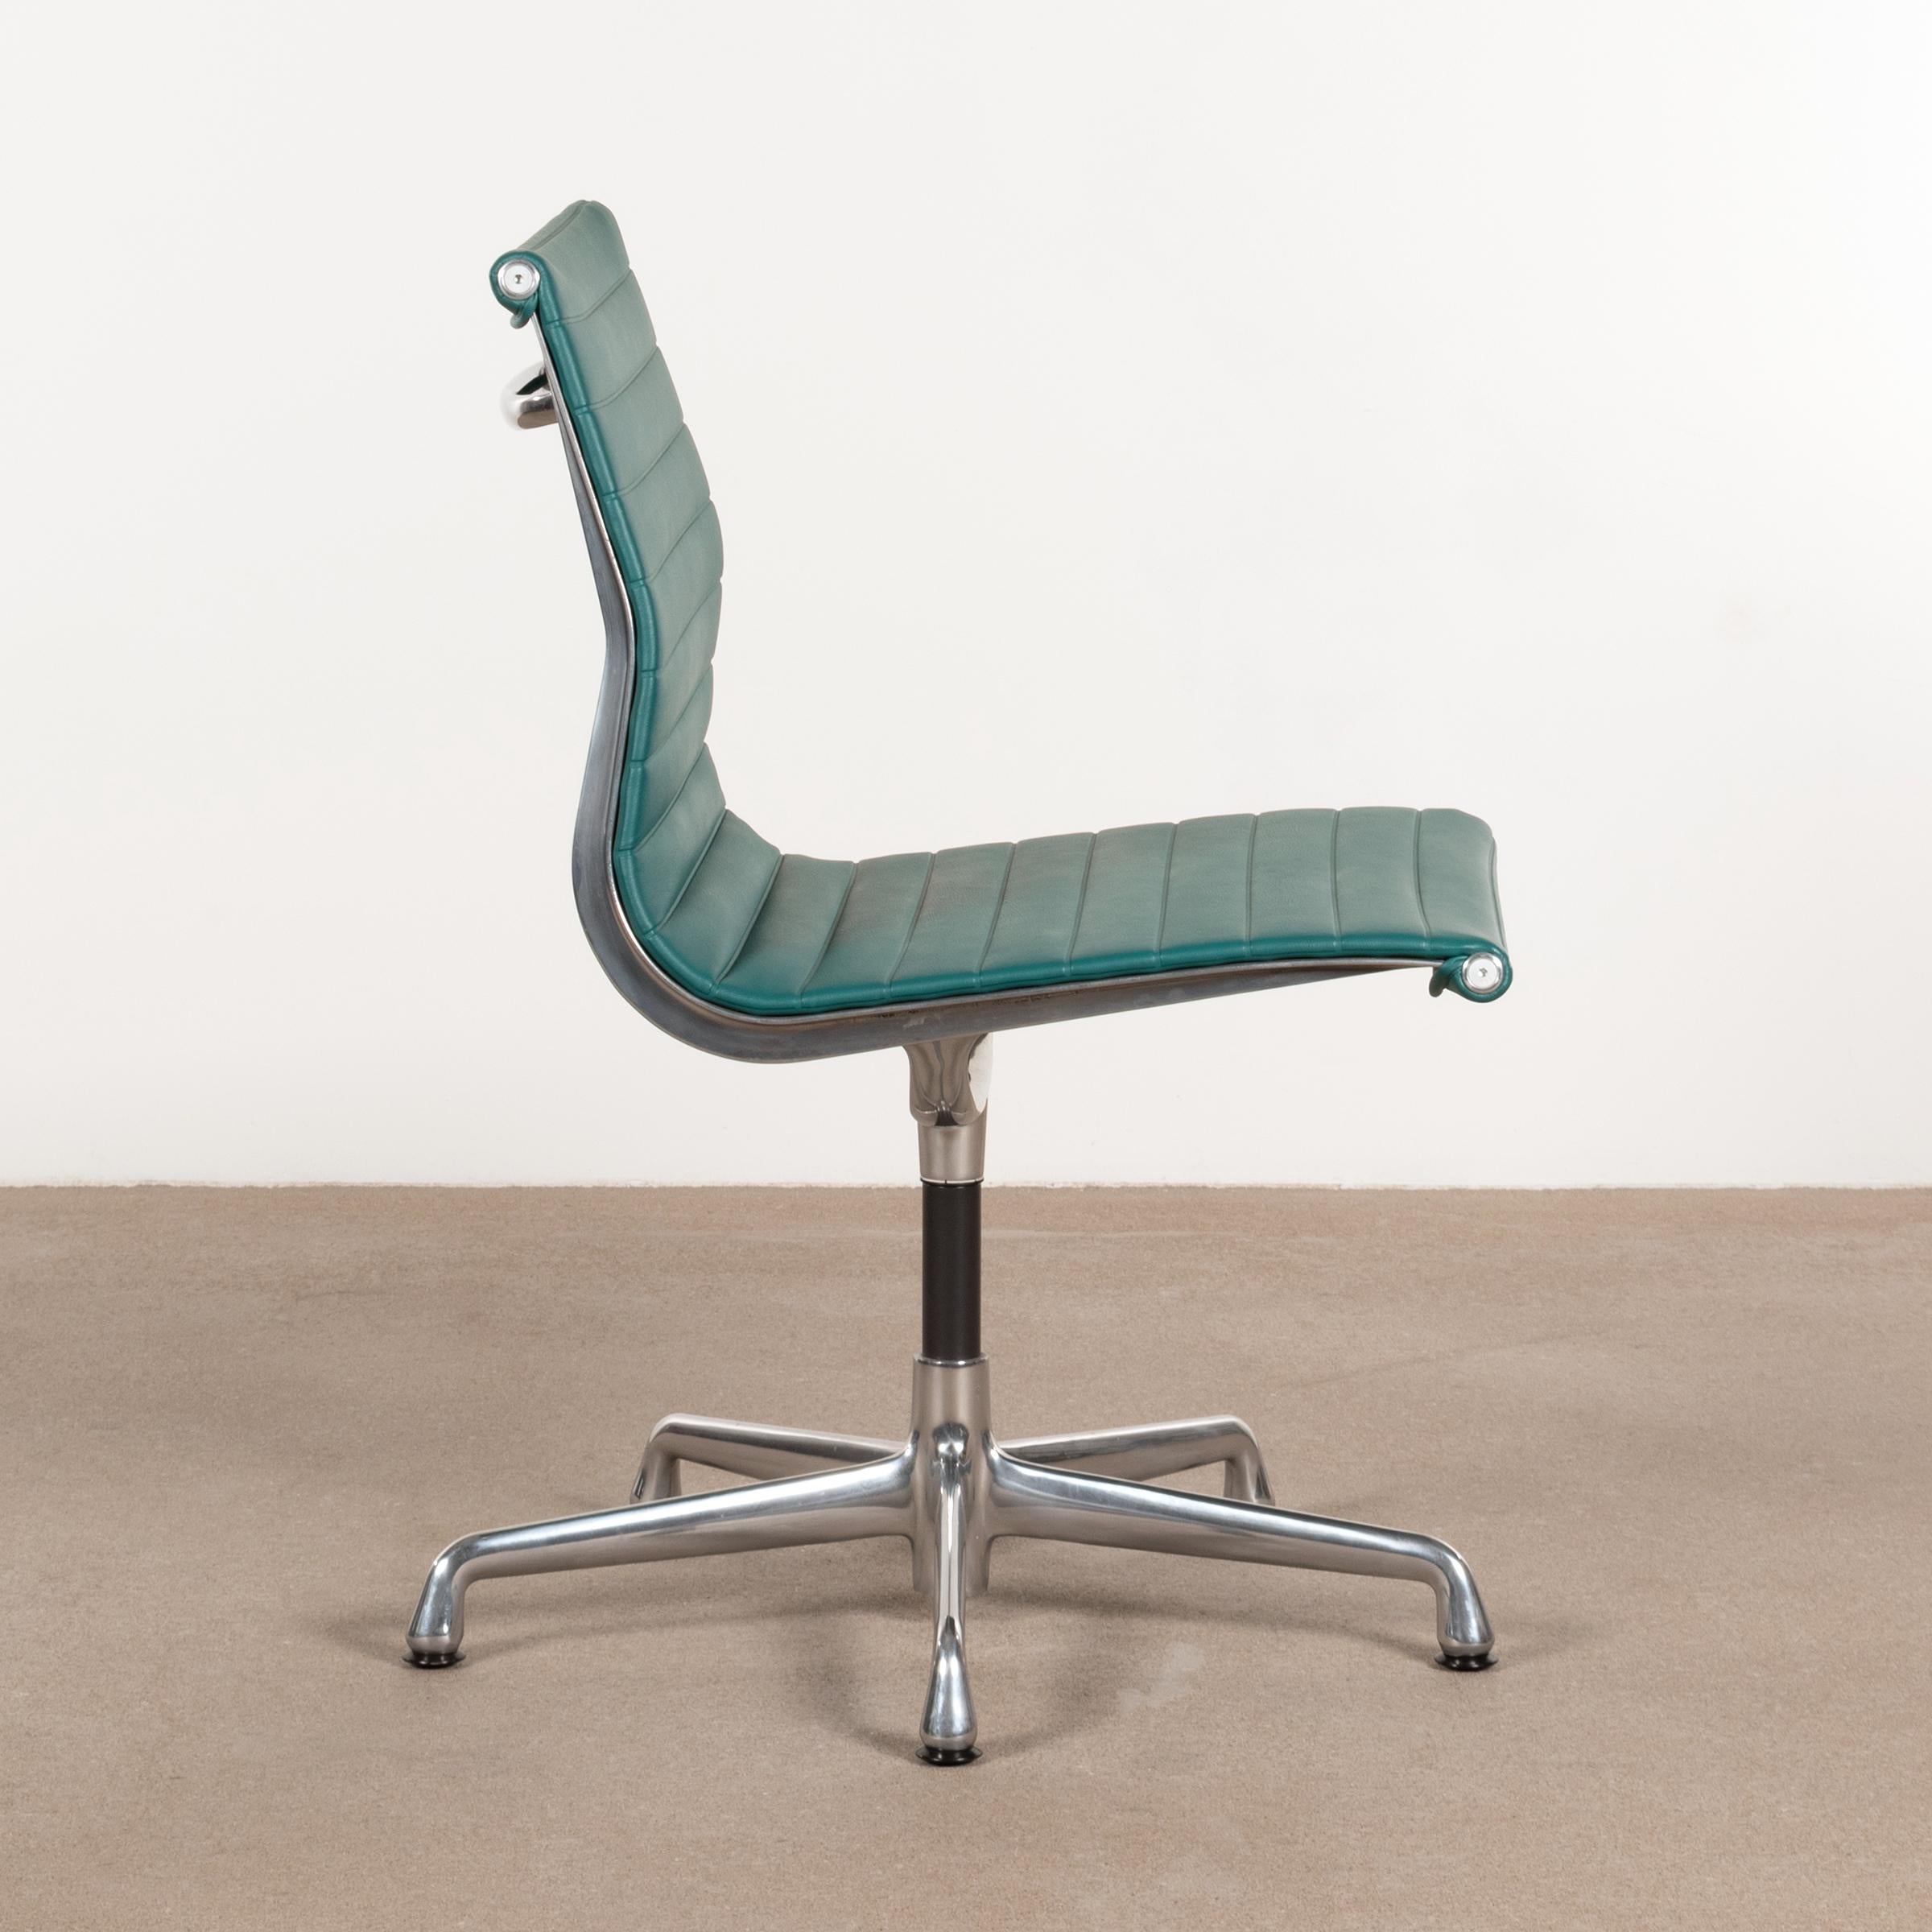 Eames EA330 conference chair in turquoise vinyl with five-star base and swivel mechanism. Very good original condition signed with manufacturer's label. Multiple chairs available.